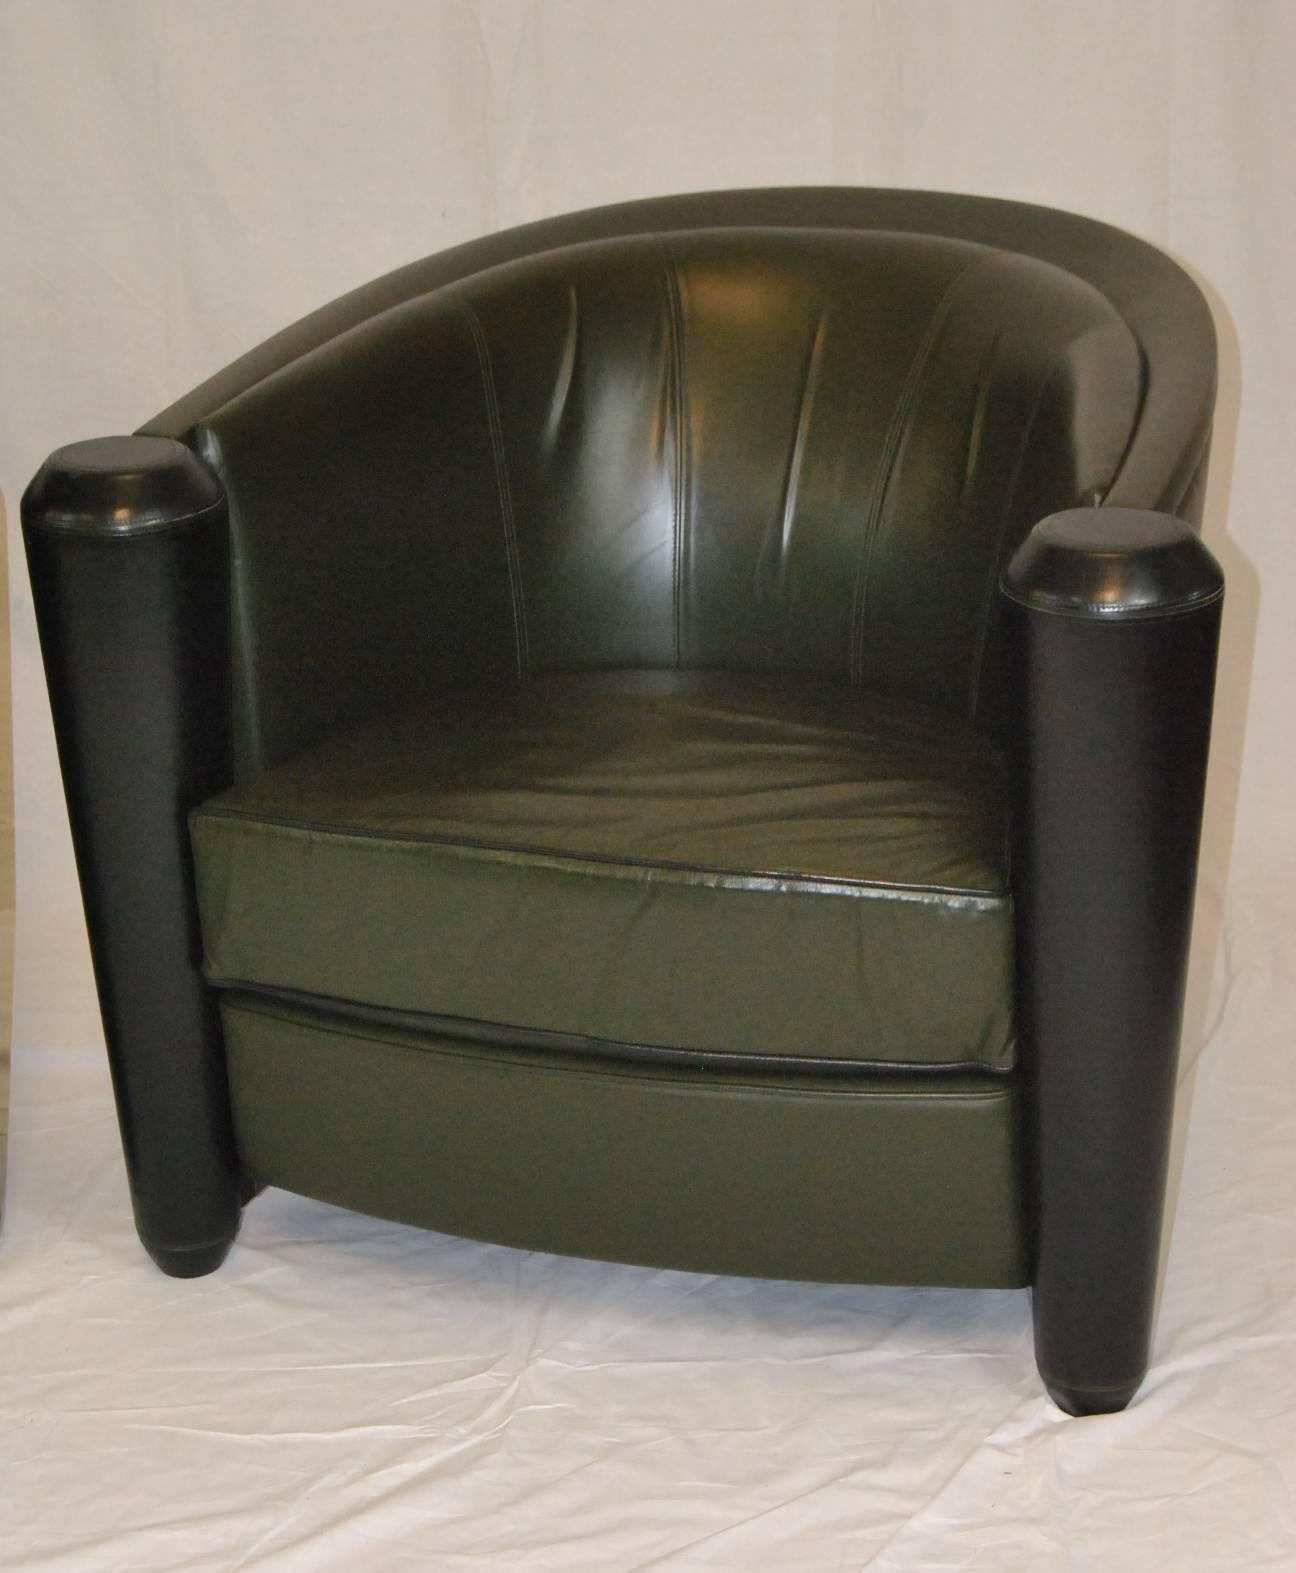 A beautiful pair of Italian leather club chairs designed by Adam Tihany for the Pace Collection.  The chairs are in dark olive green with black accents.  Manufactured by I4 Mariani.  Circa 1990's.